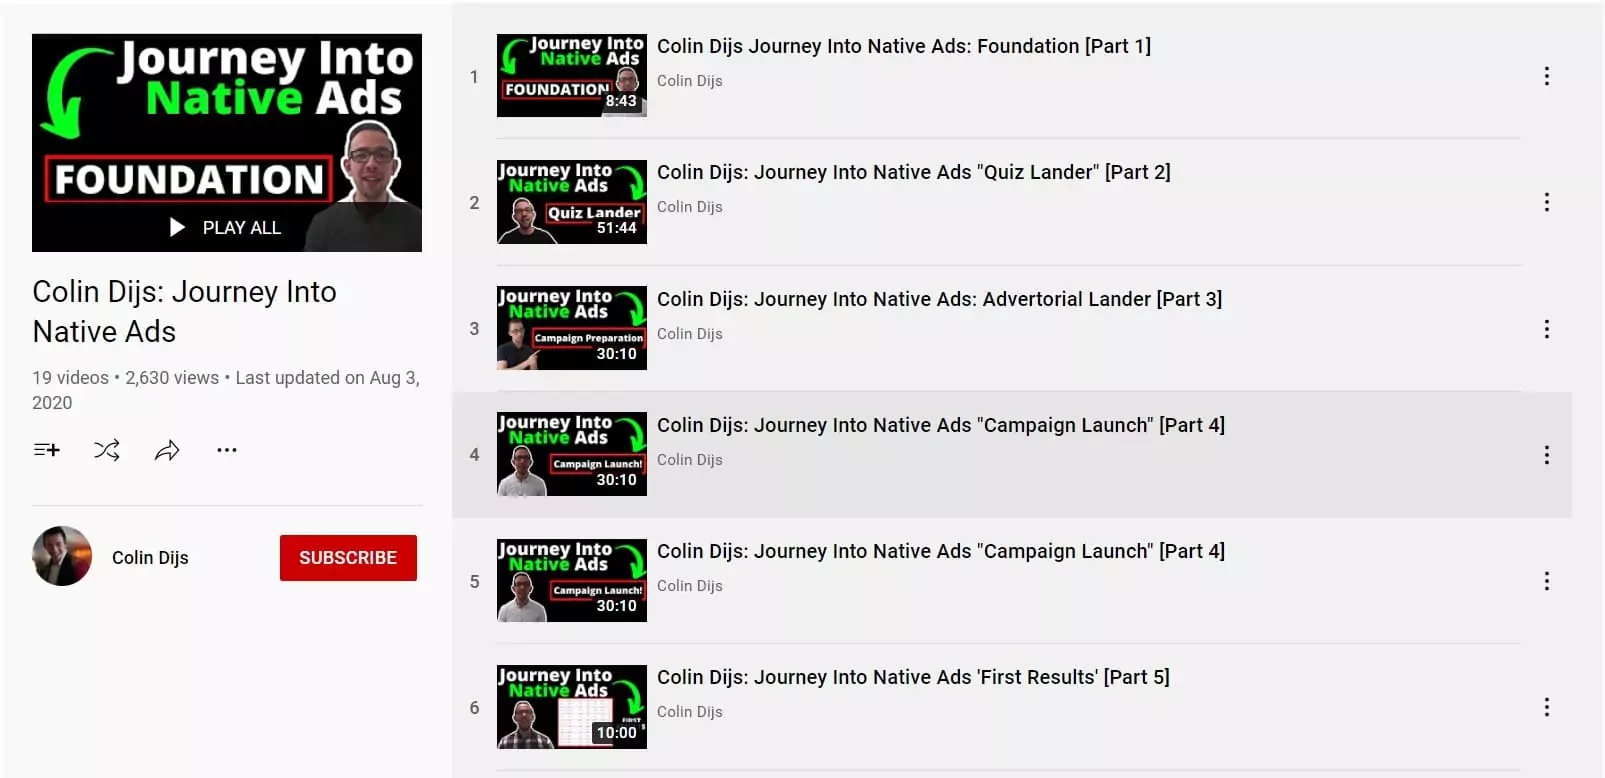 Colin Dijs YouTube Journey Into Native Ads